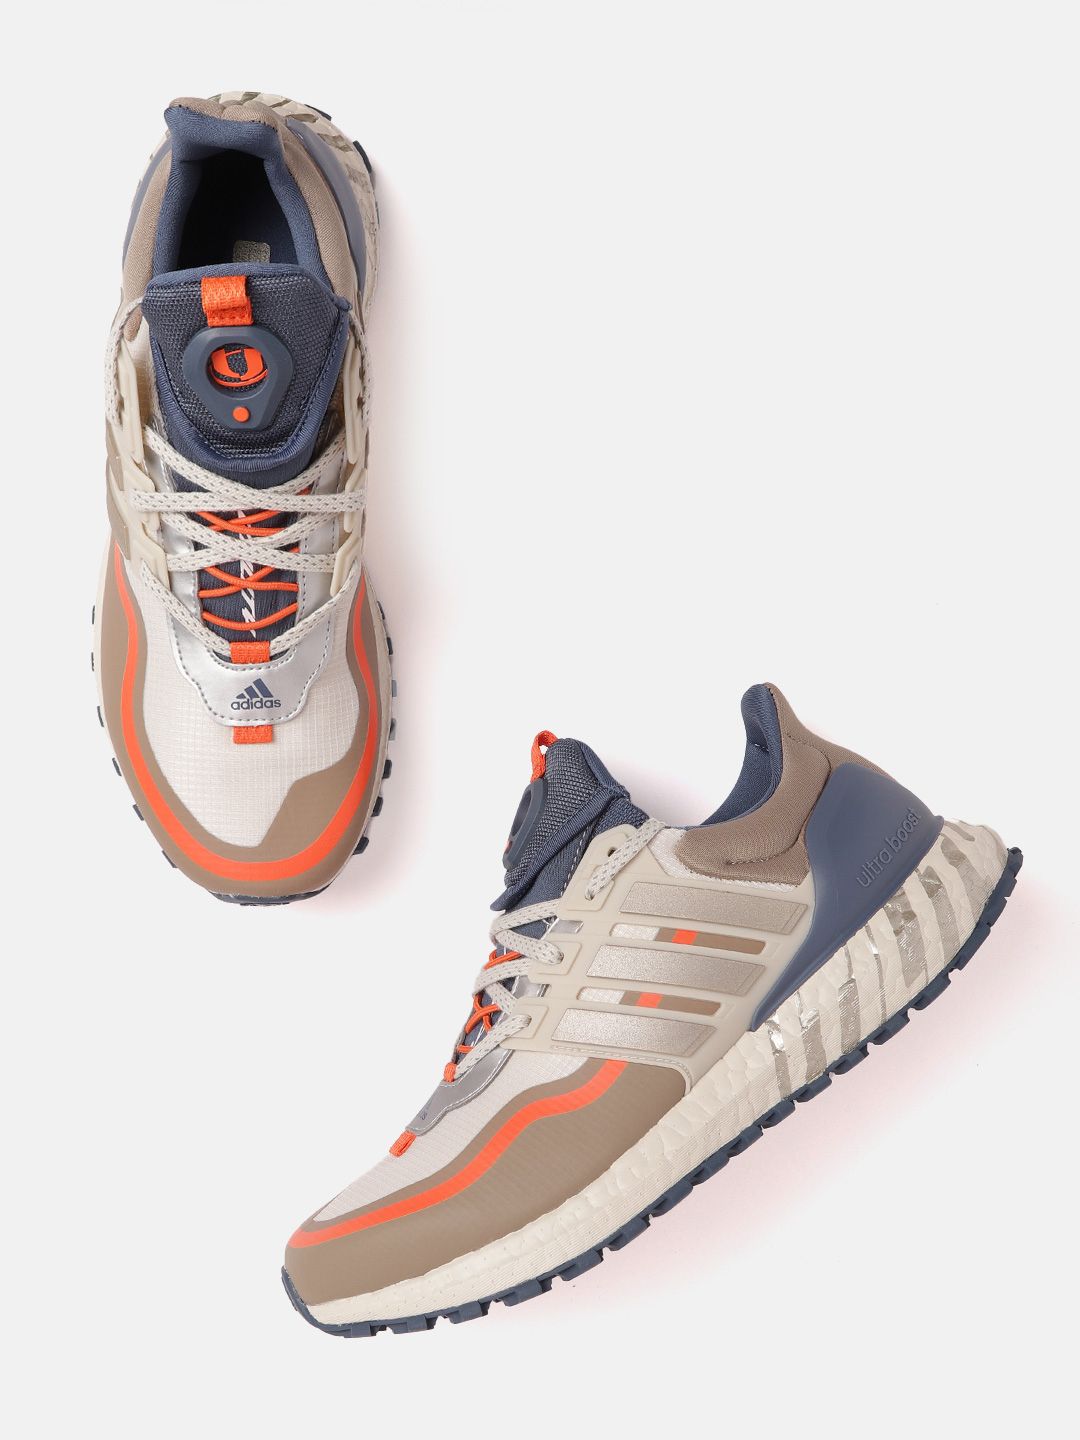 ADIDAS Unisex Off White & Beige Textured Ultraboost All Terrain Running Shoes Price in India